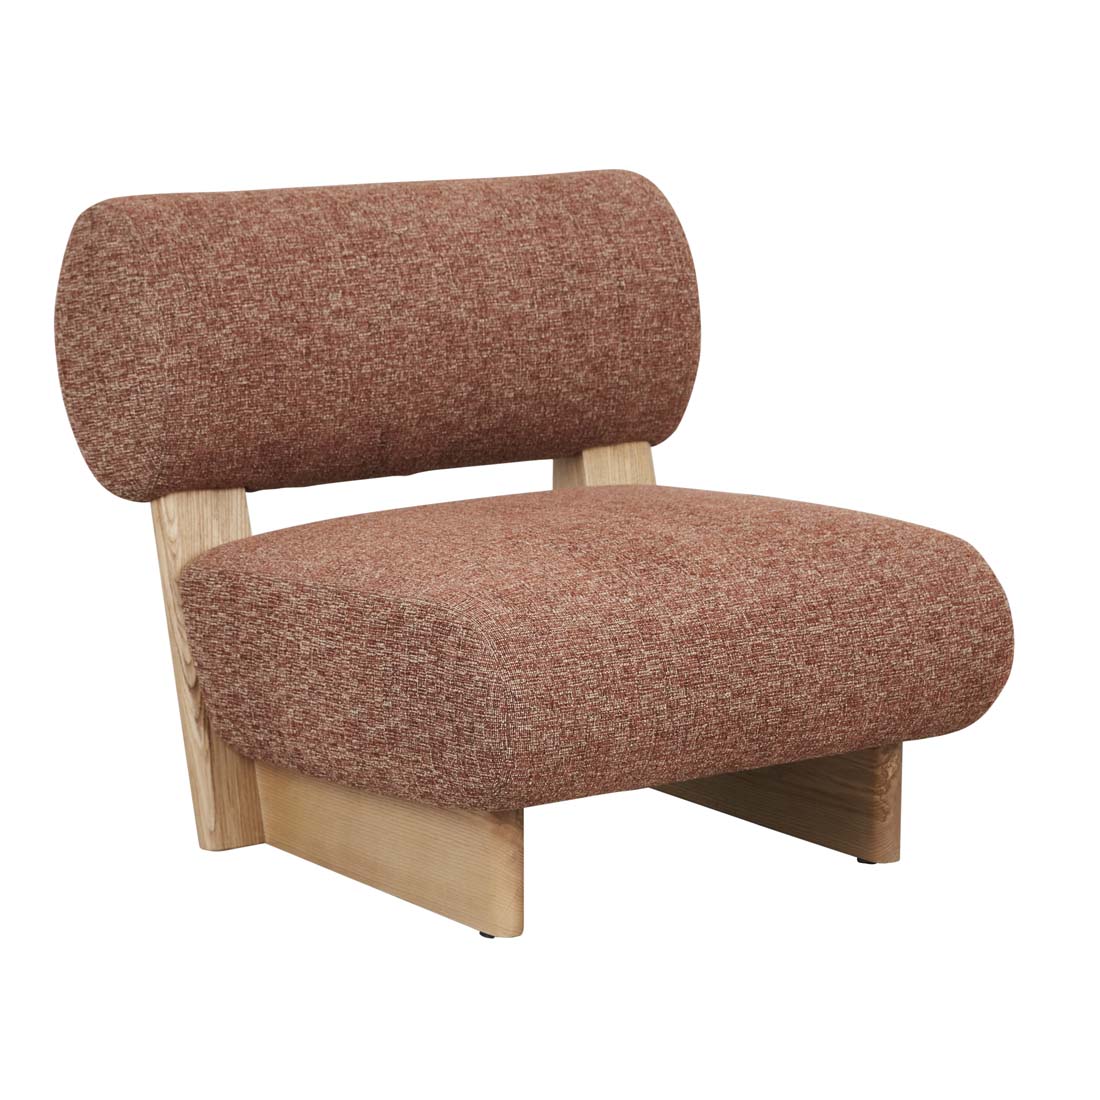 Pinto Occasional Chair image 8